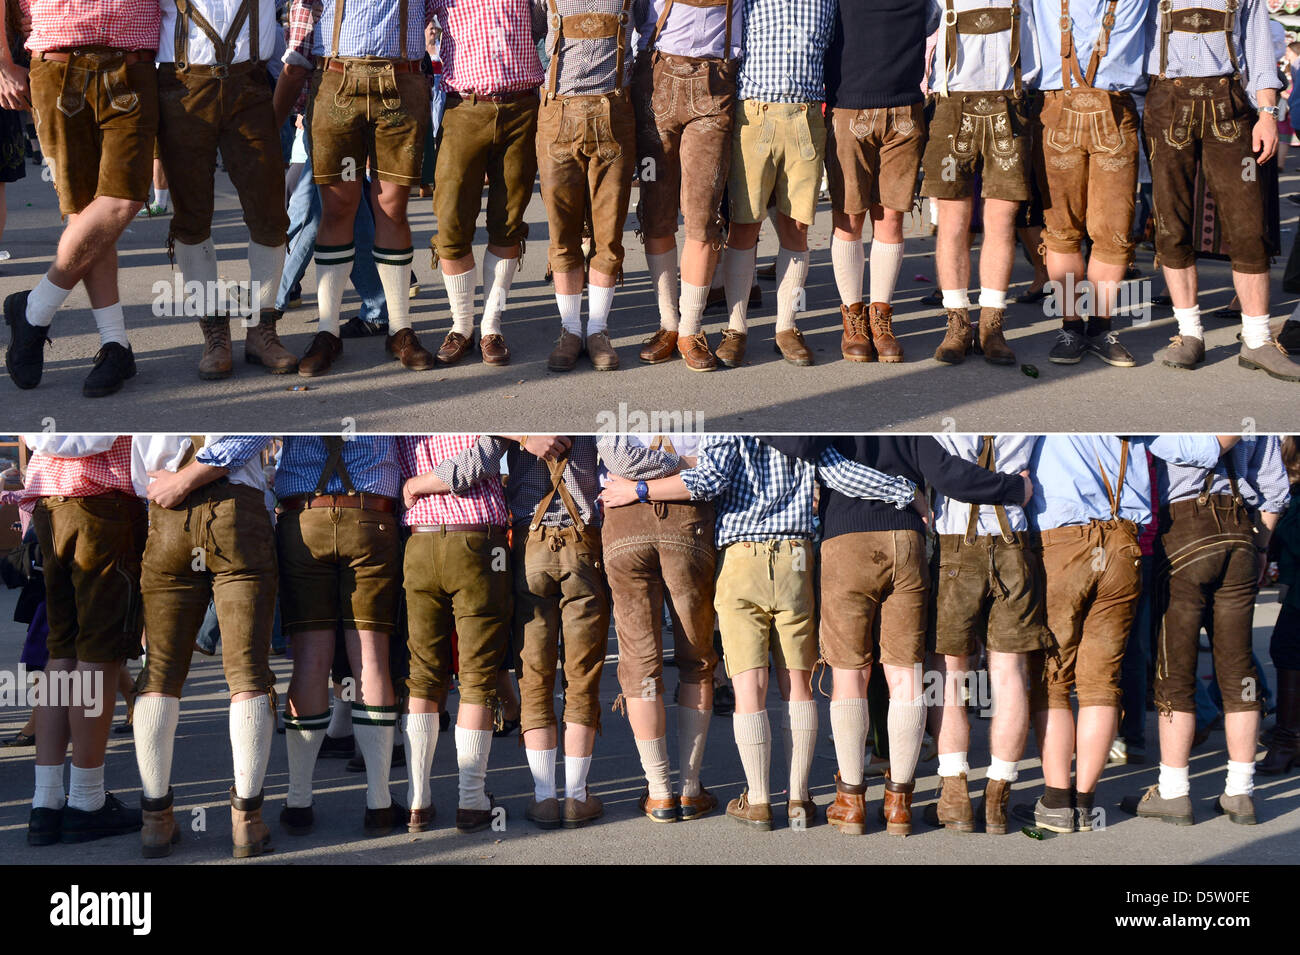 COMBO) A composite image shows men wearing Lederhosen at Oktoberfest in  Munich, 29 September 2012. Oktoberfest is the world's largest folk festival  and takes place from 22 September until 07 October this